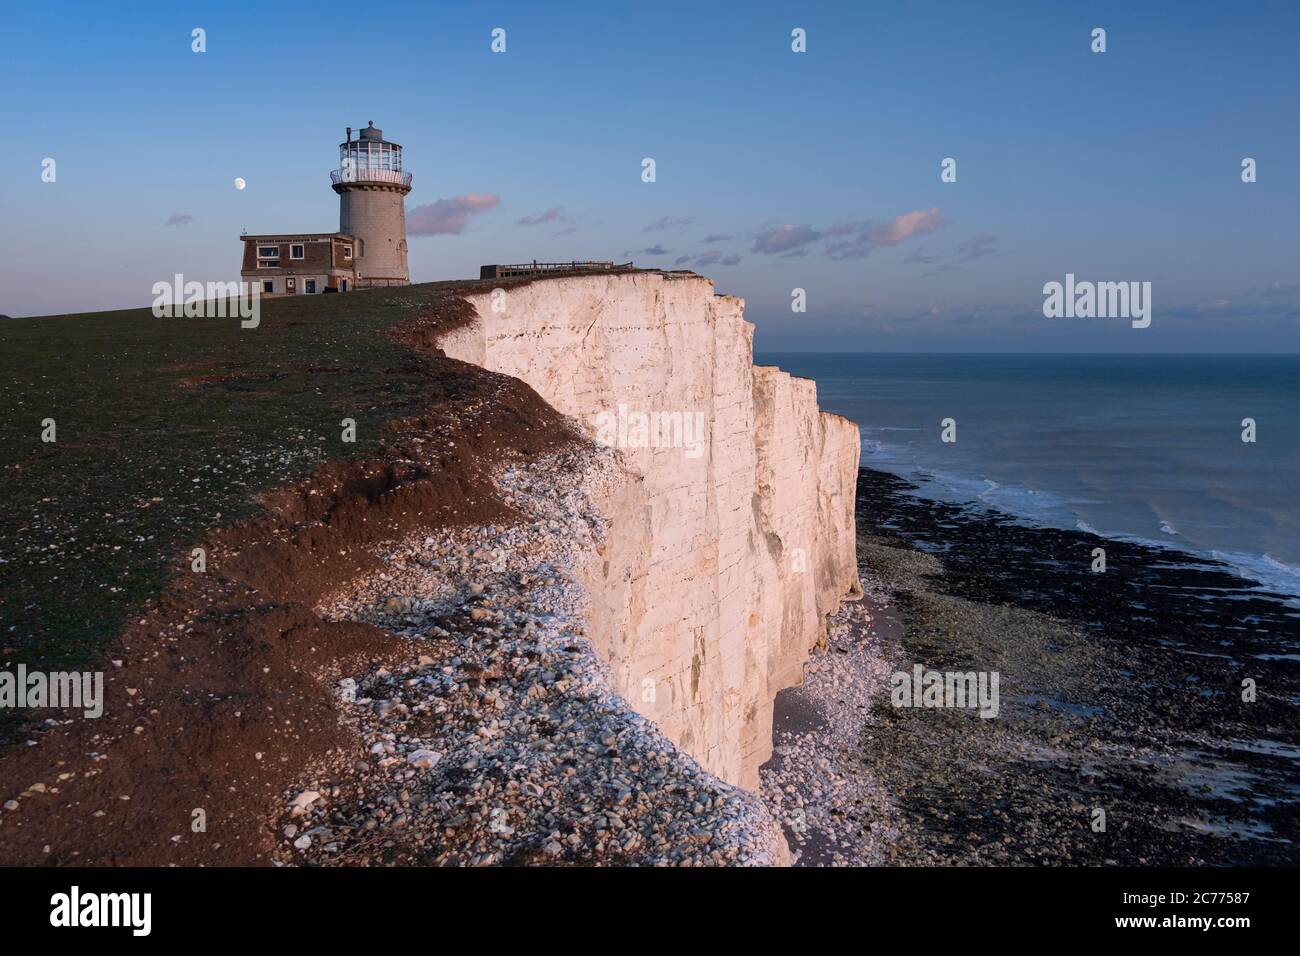 Moonrise sopra Belle Tout Lighthouse al tramonto, Beachy Head, vicino a Eastbourne, South Downs National Park, East Sussex, Inghilterra, Regno Unito Foto Stock